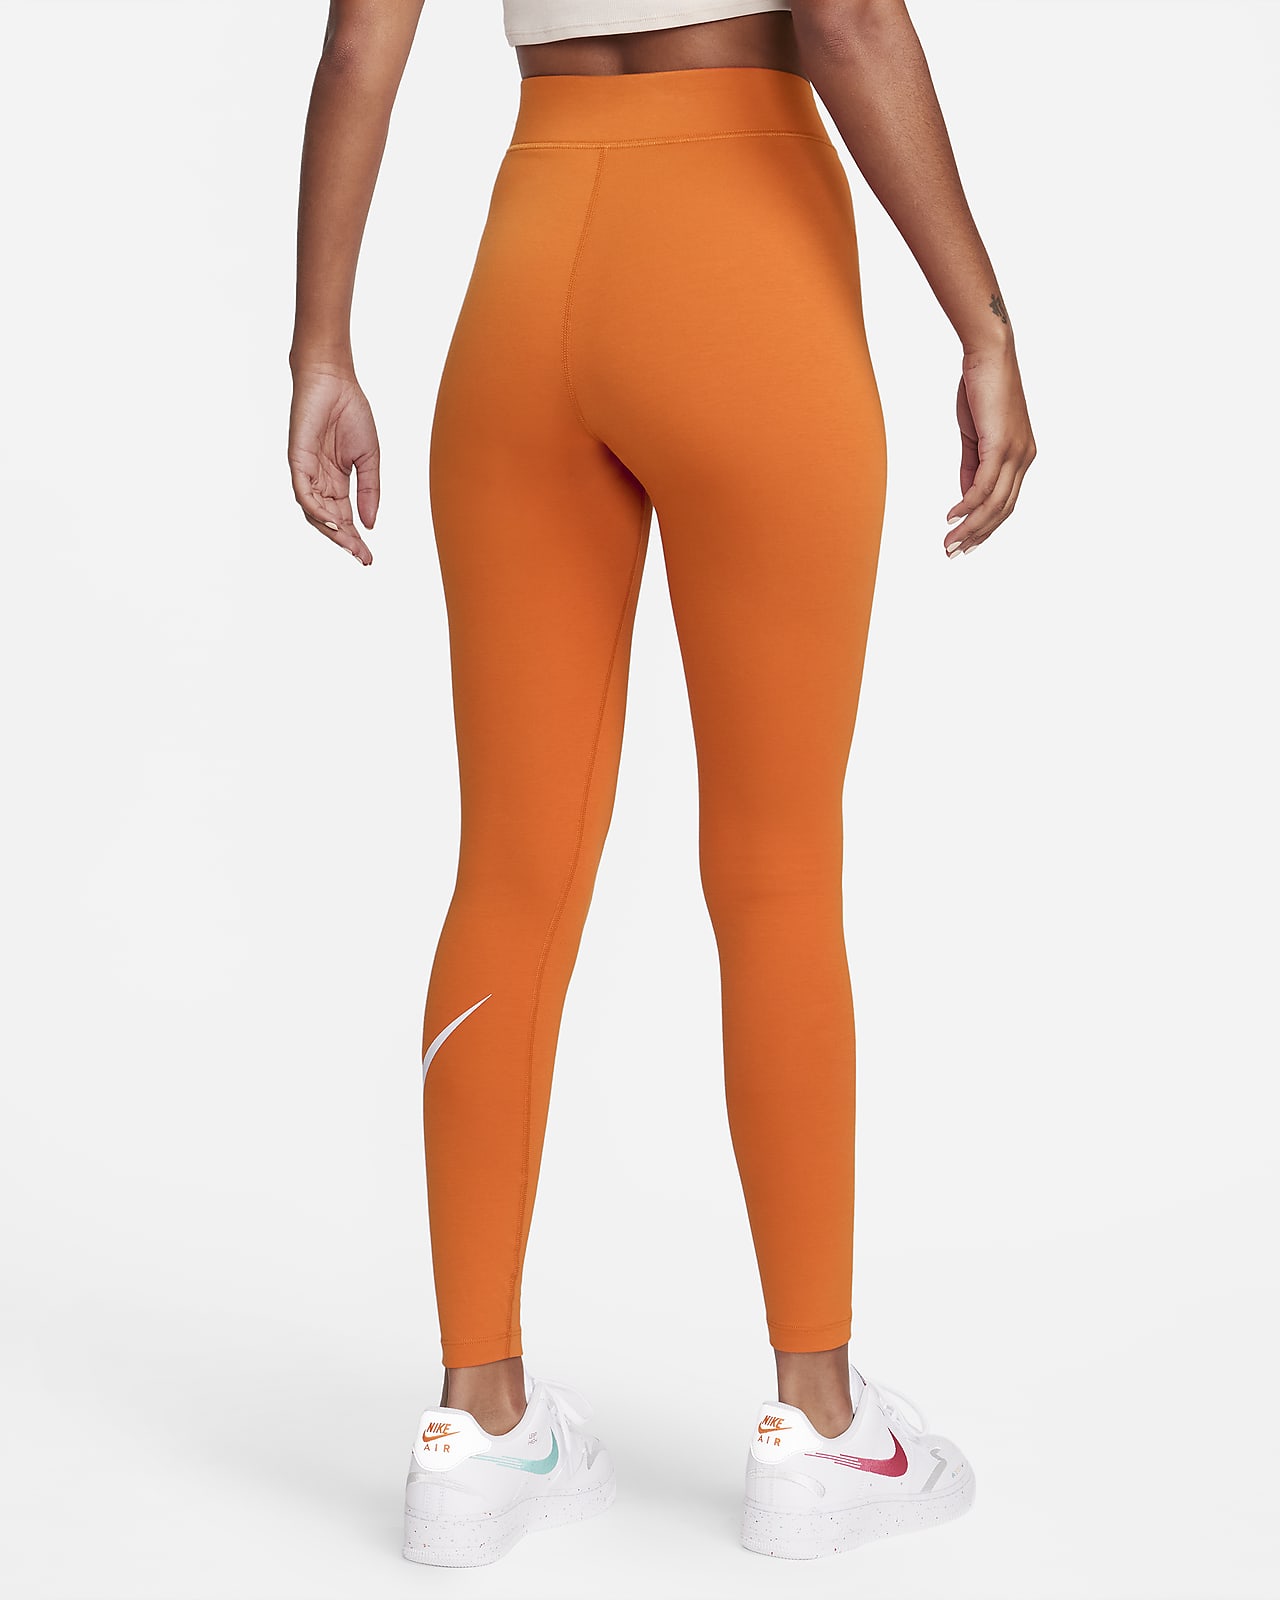 bev staples recommends Latina Booty In Leggings